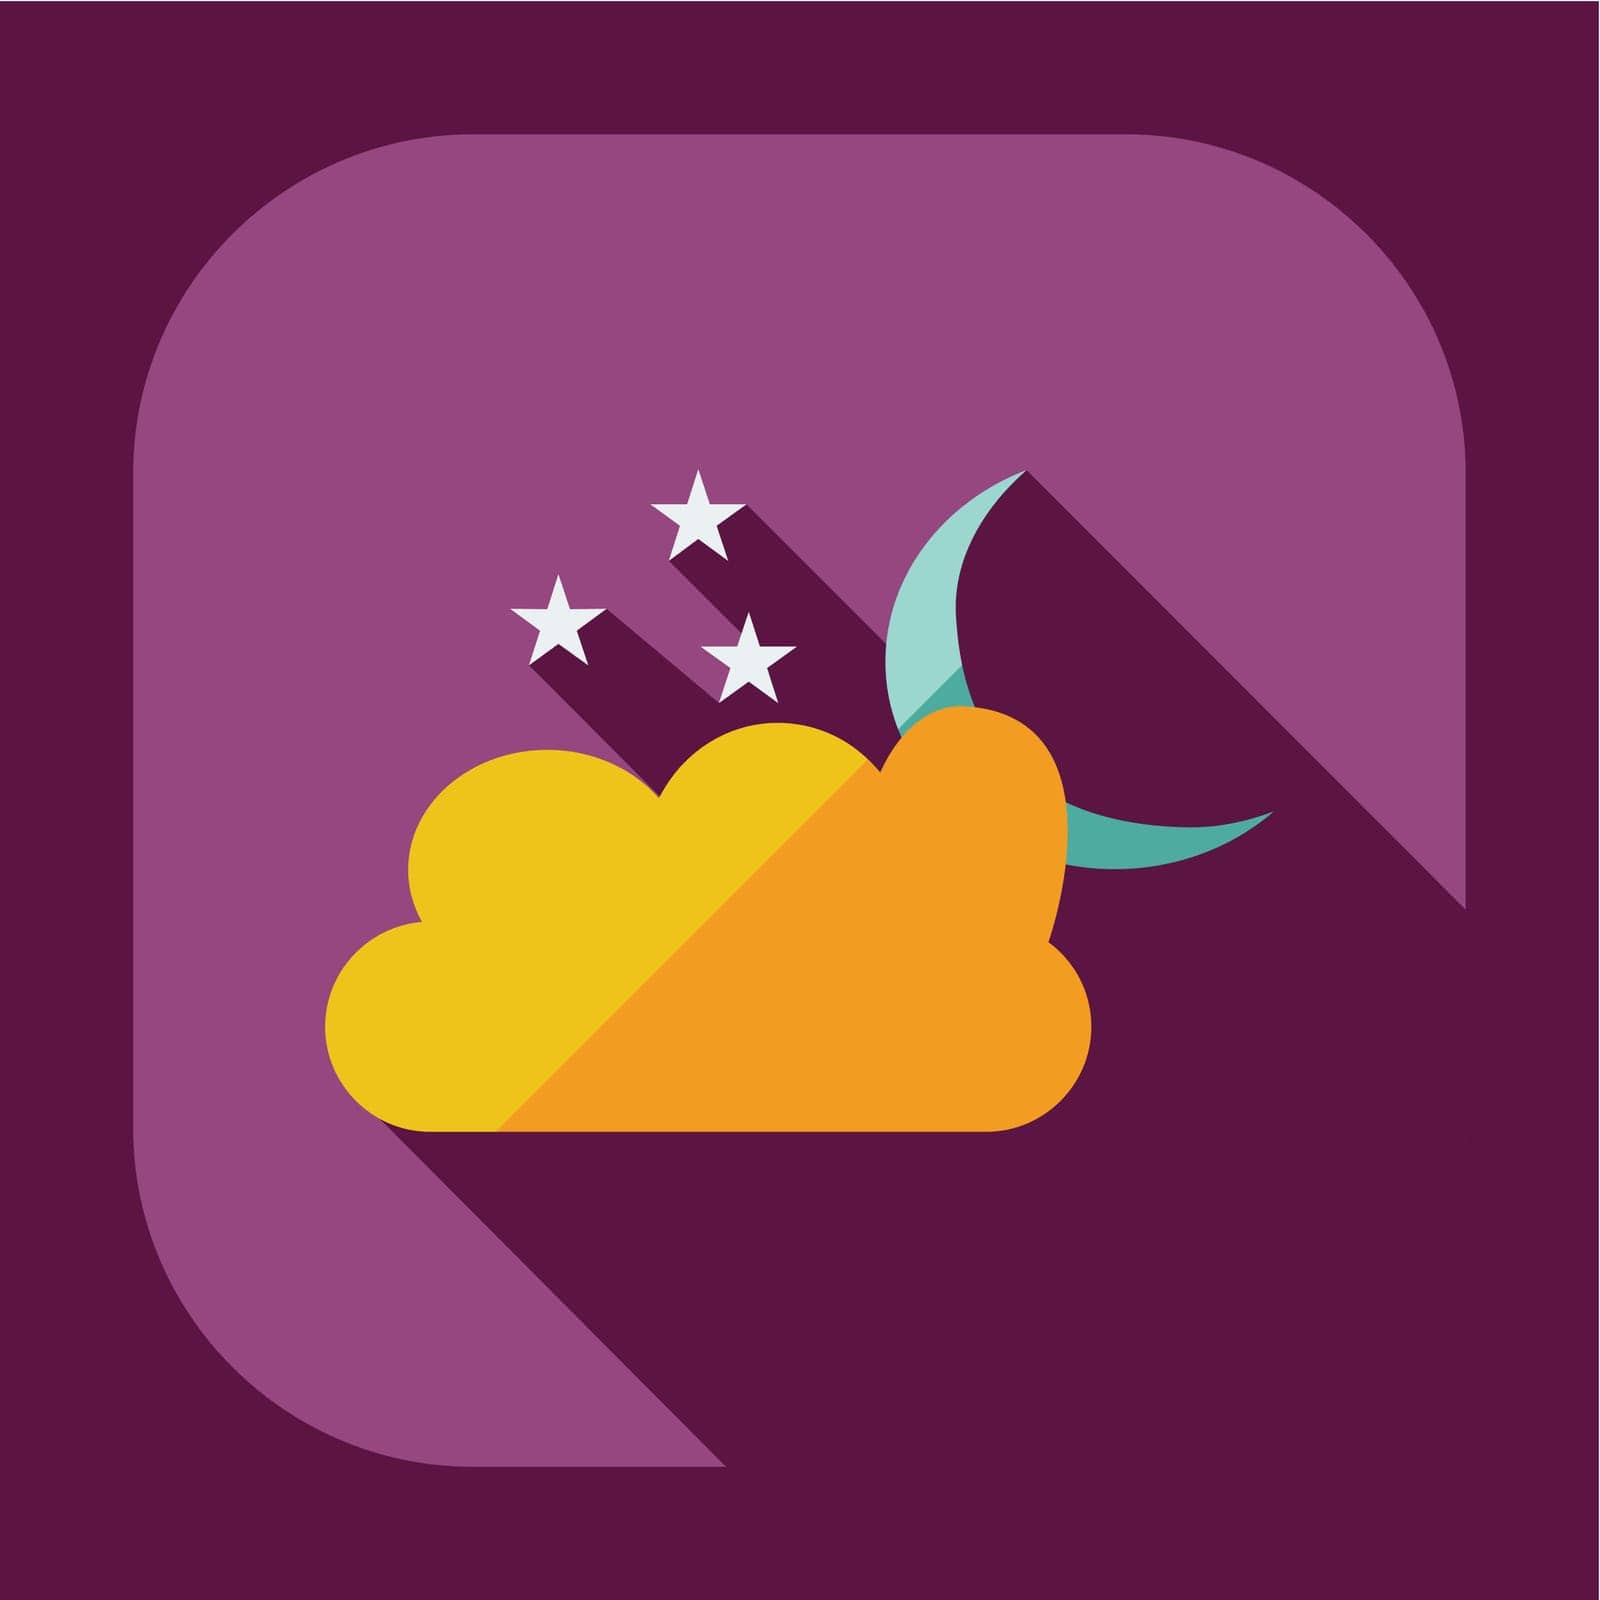 symbol,moonlight,shadow,eps10,idea,icon,bright,astrology,space,cloud,usability,modern,starry,web,flat,design,dark,vector,seo,programming,sky,app,art,set,wallpaper,business,nature,social,texture,night,mobile,stars,abstract,astronomy,shine,badge,marketing,moon,blue,application,light,background,silhouette,shiny,illustration,card,working,optimization